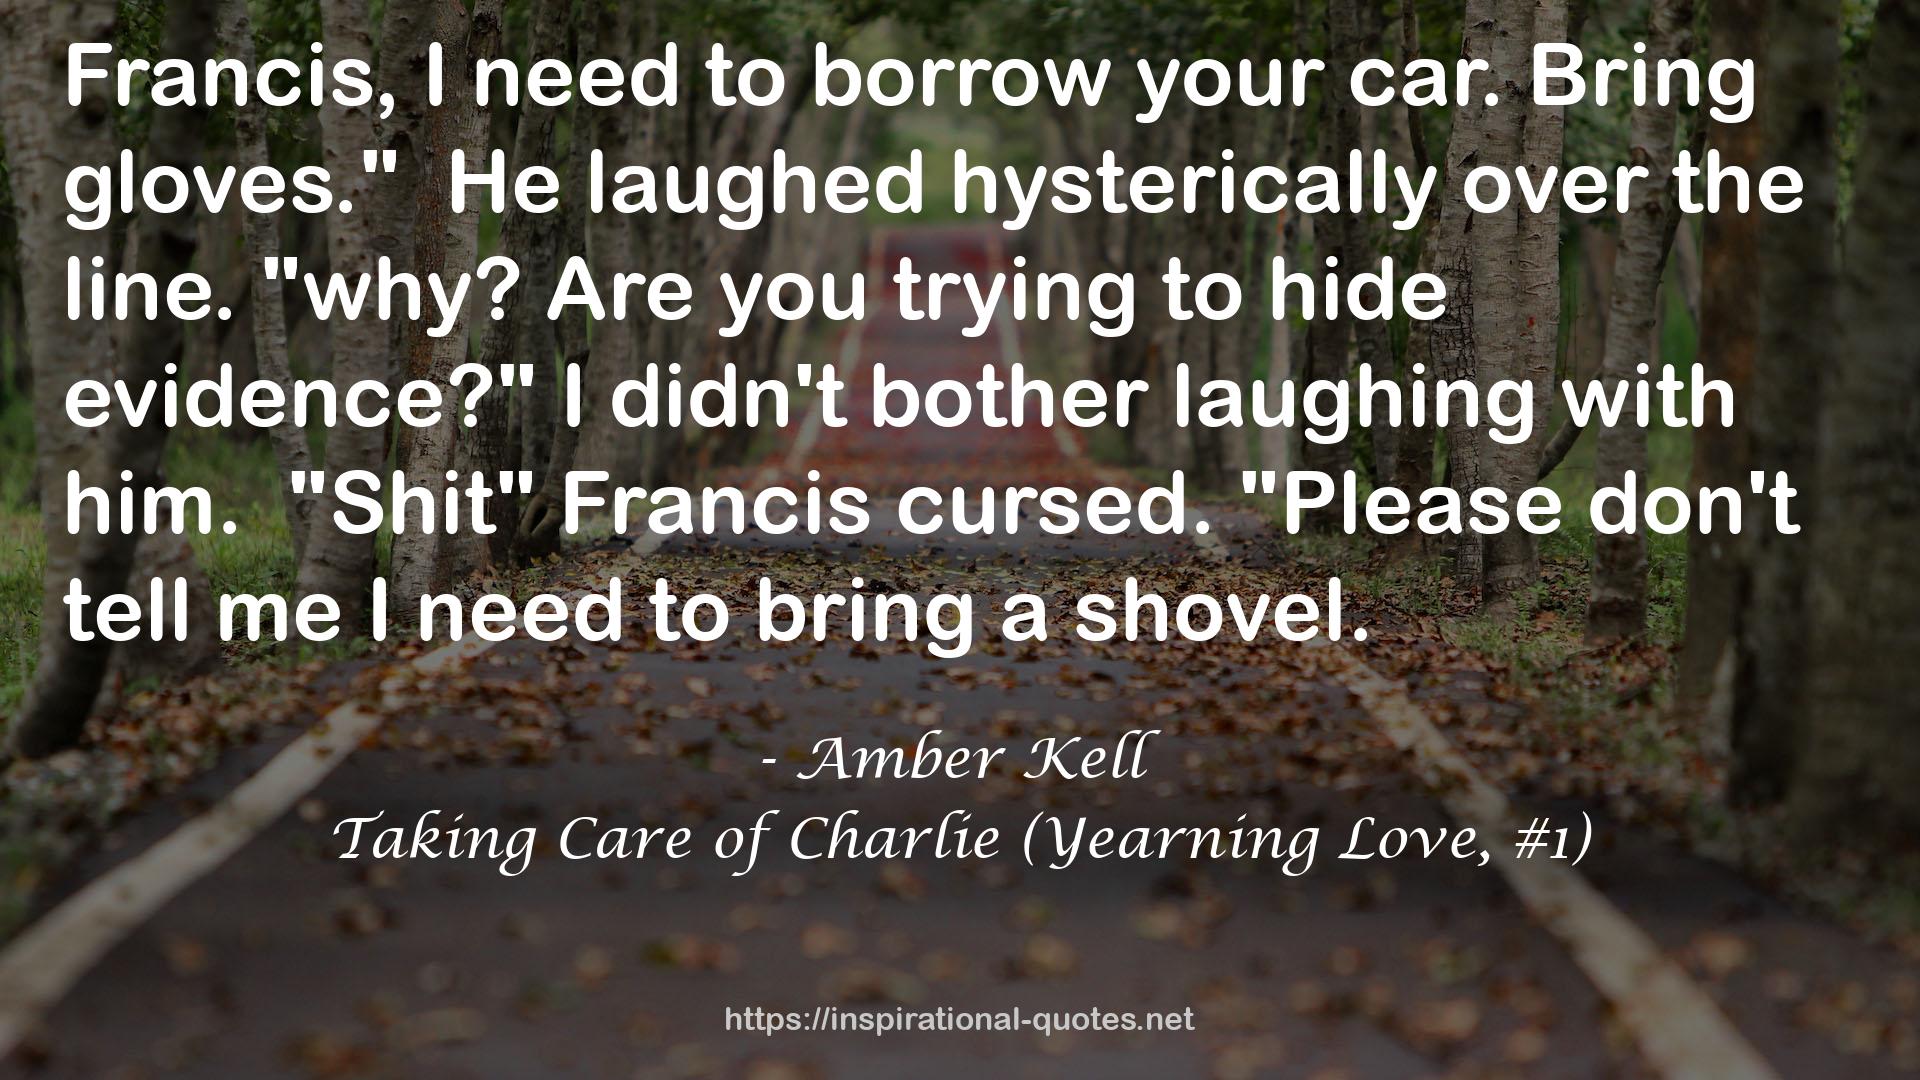 Taking Care of Charlie (Yearning Love, #1) QUOTES